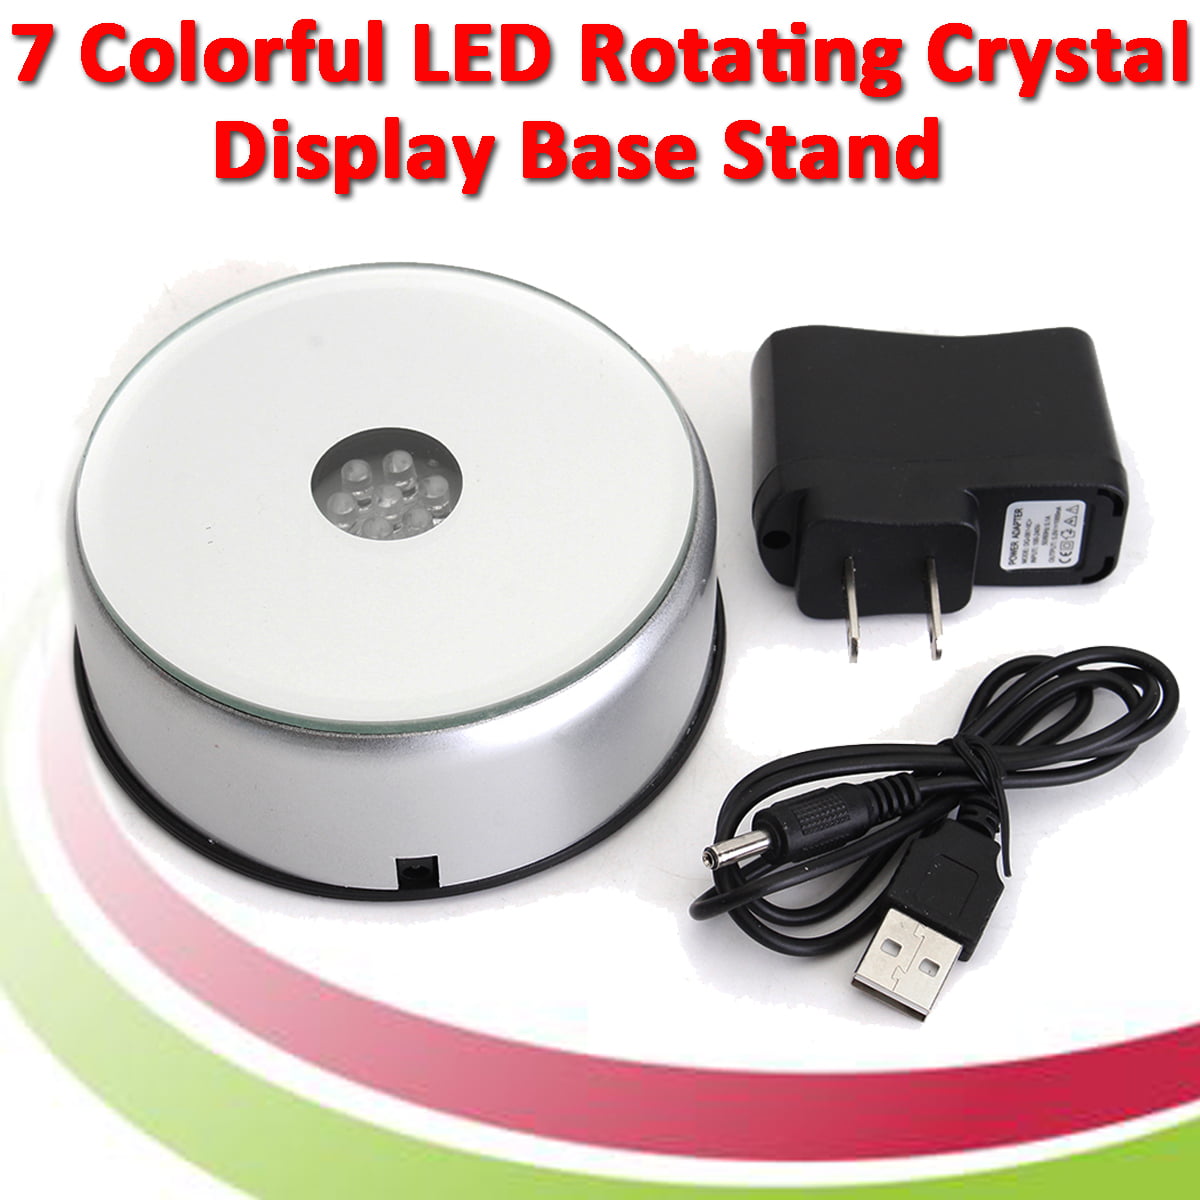 3D LED DISPLAY STAND BASE 3 light battery or AC adapter power show room light up 